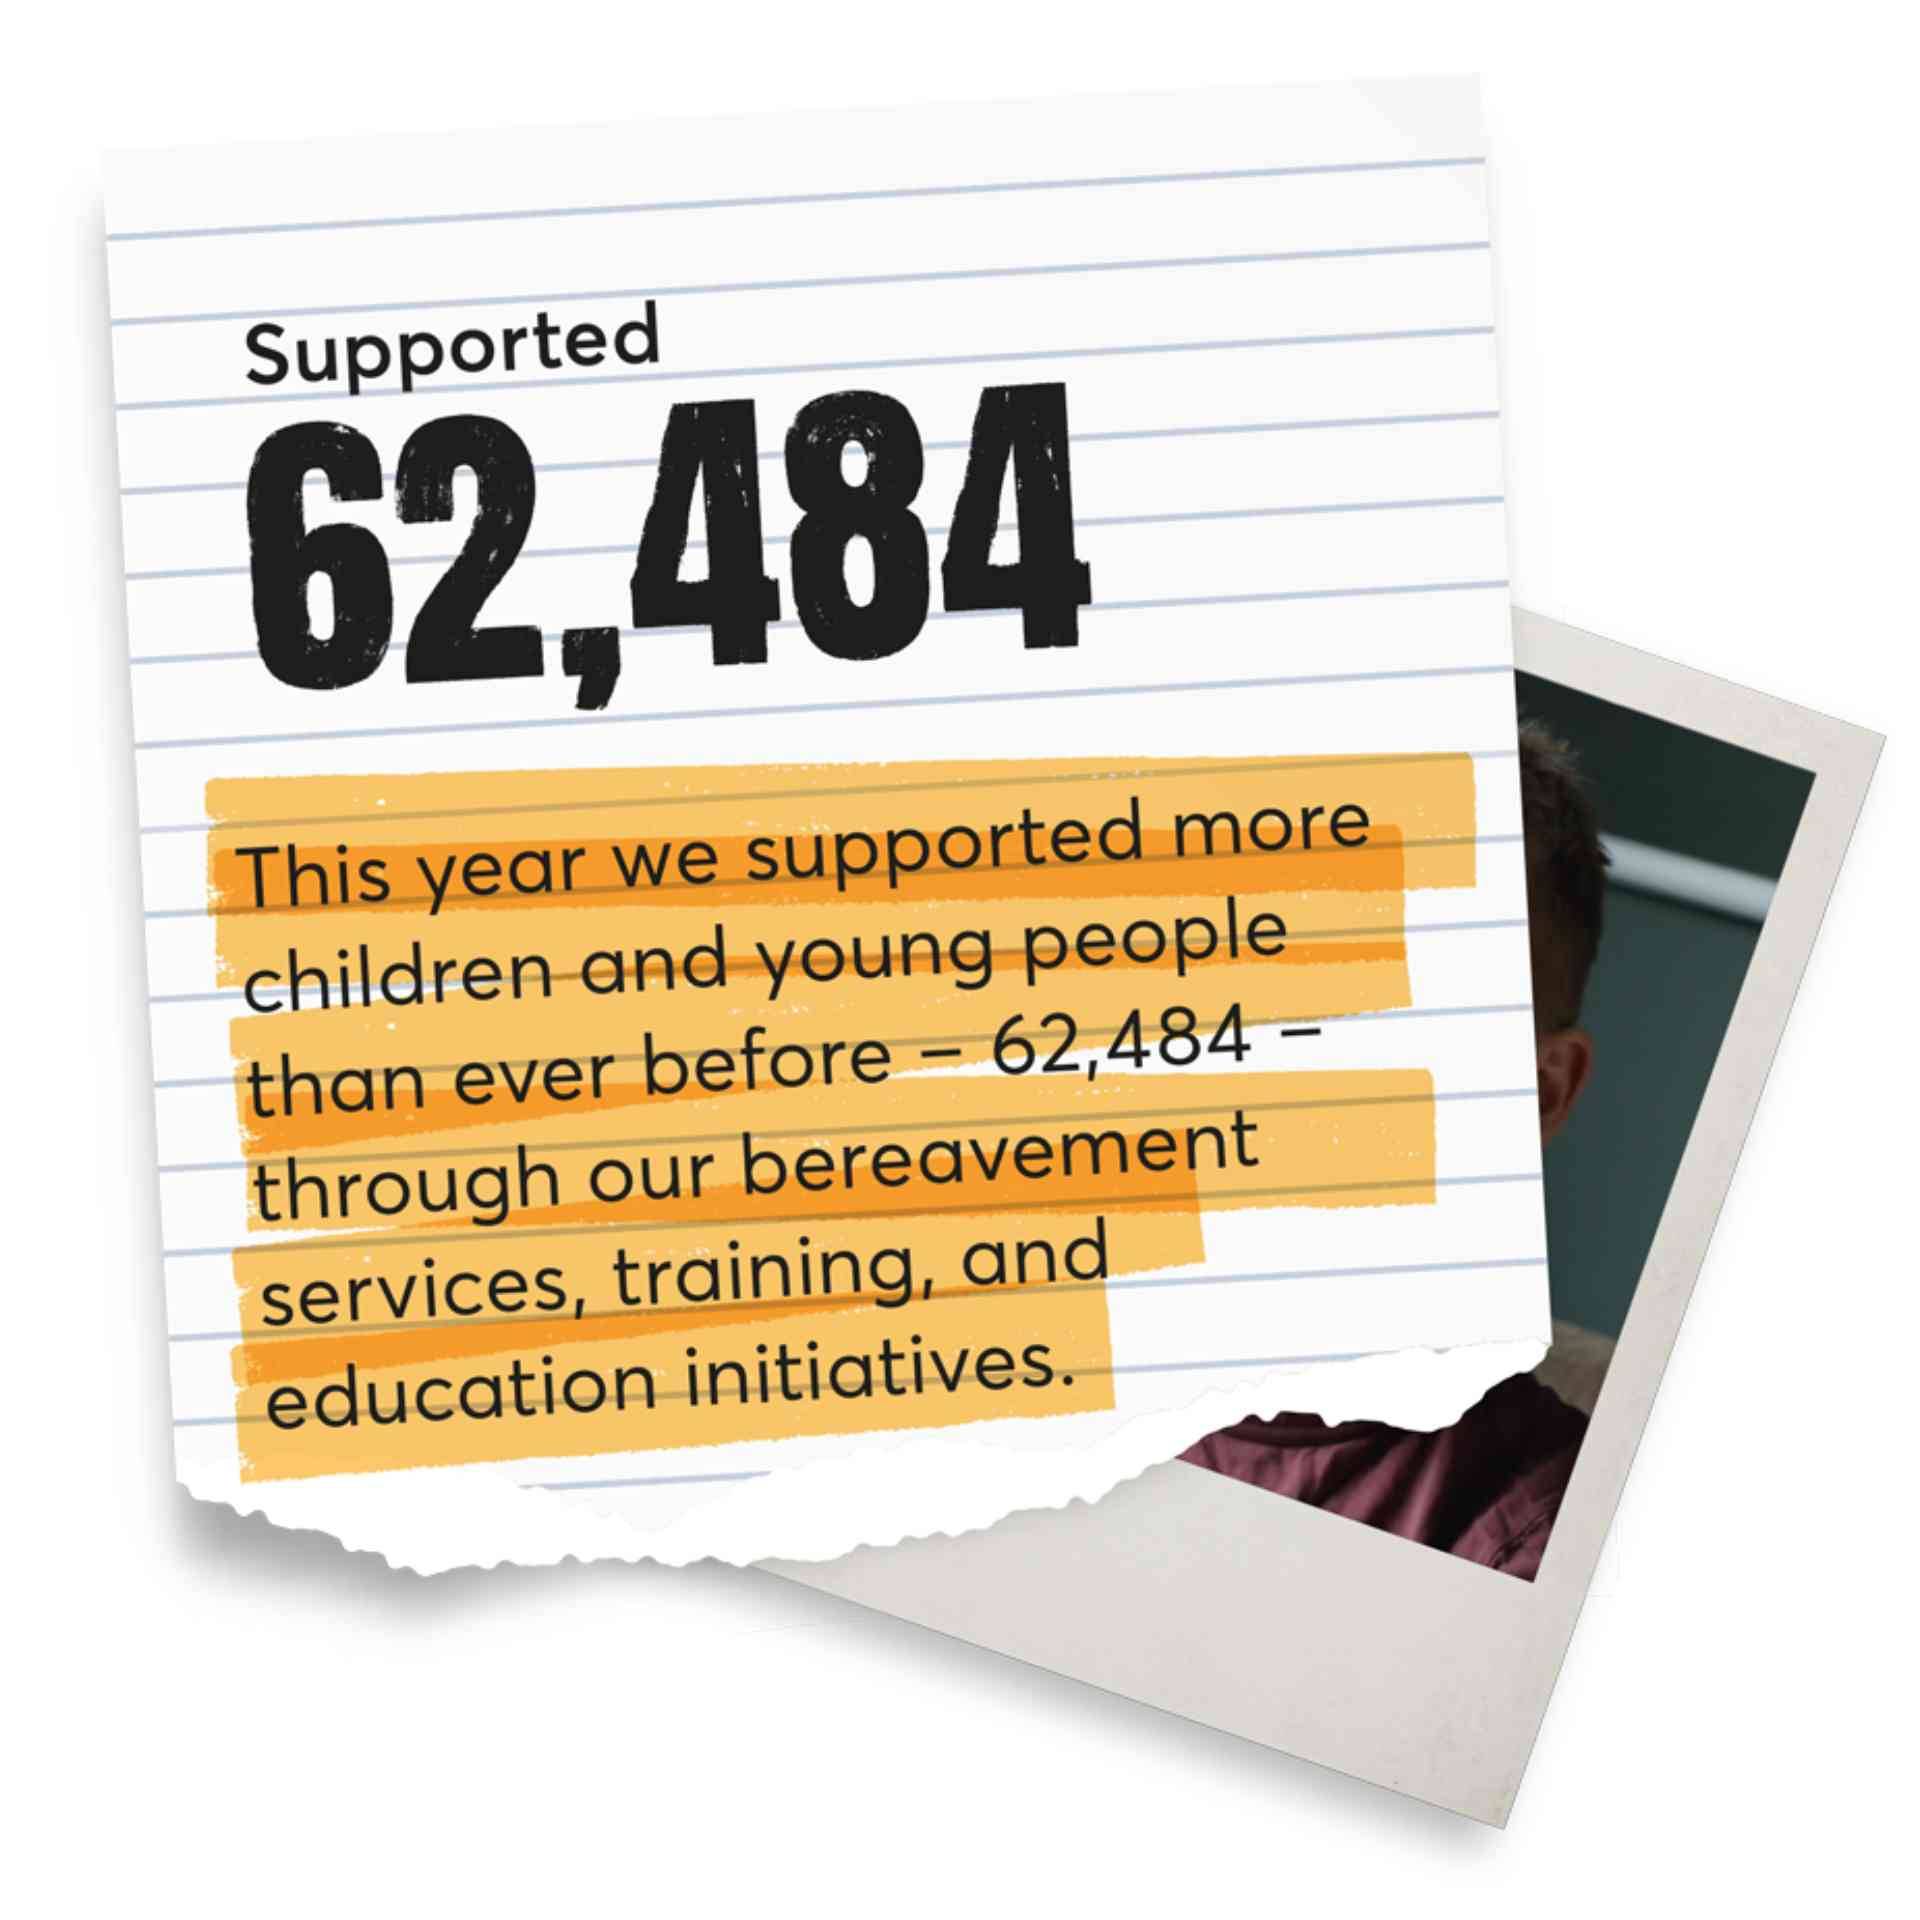 Supported 62,484. This year we supported more children and young people than ever before - \62,484 - through our bereavement services, training and education initiatives. Winston's Wish